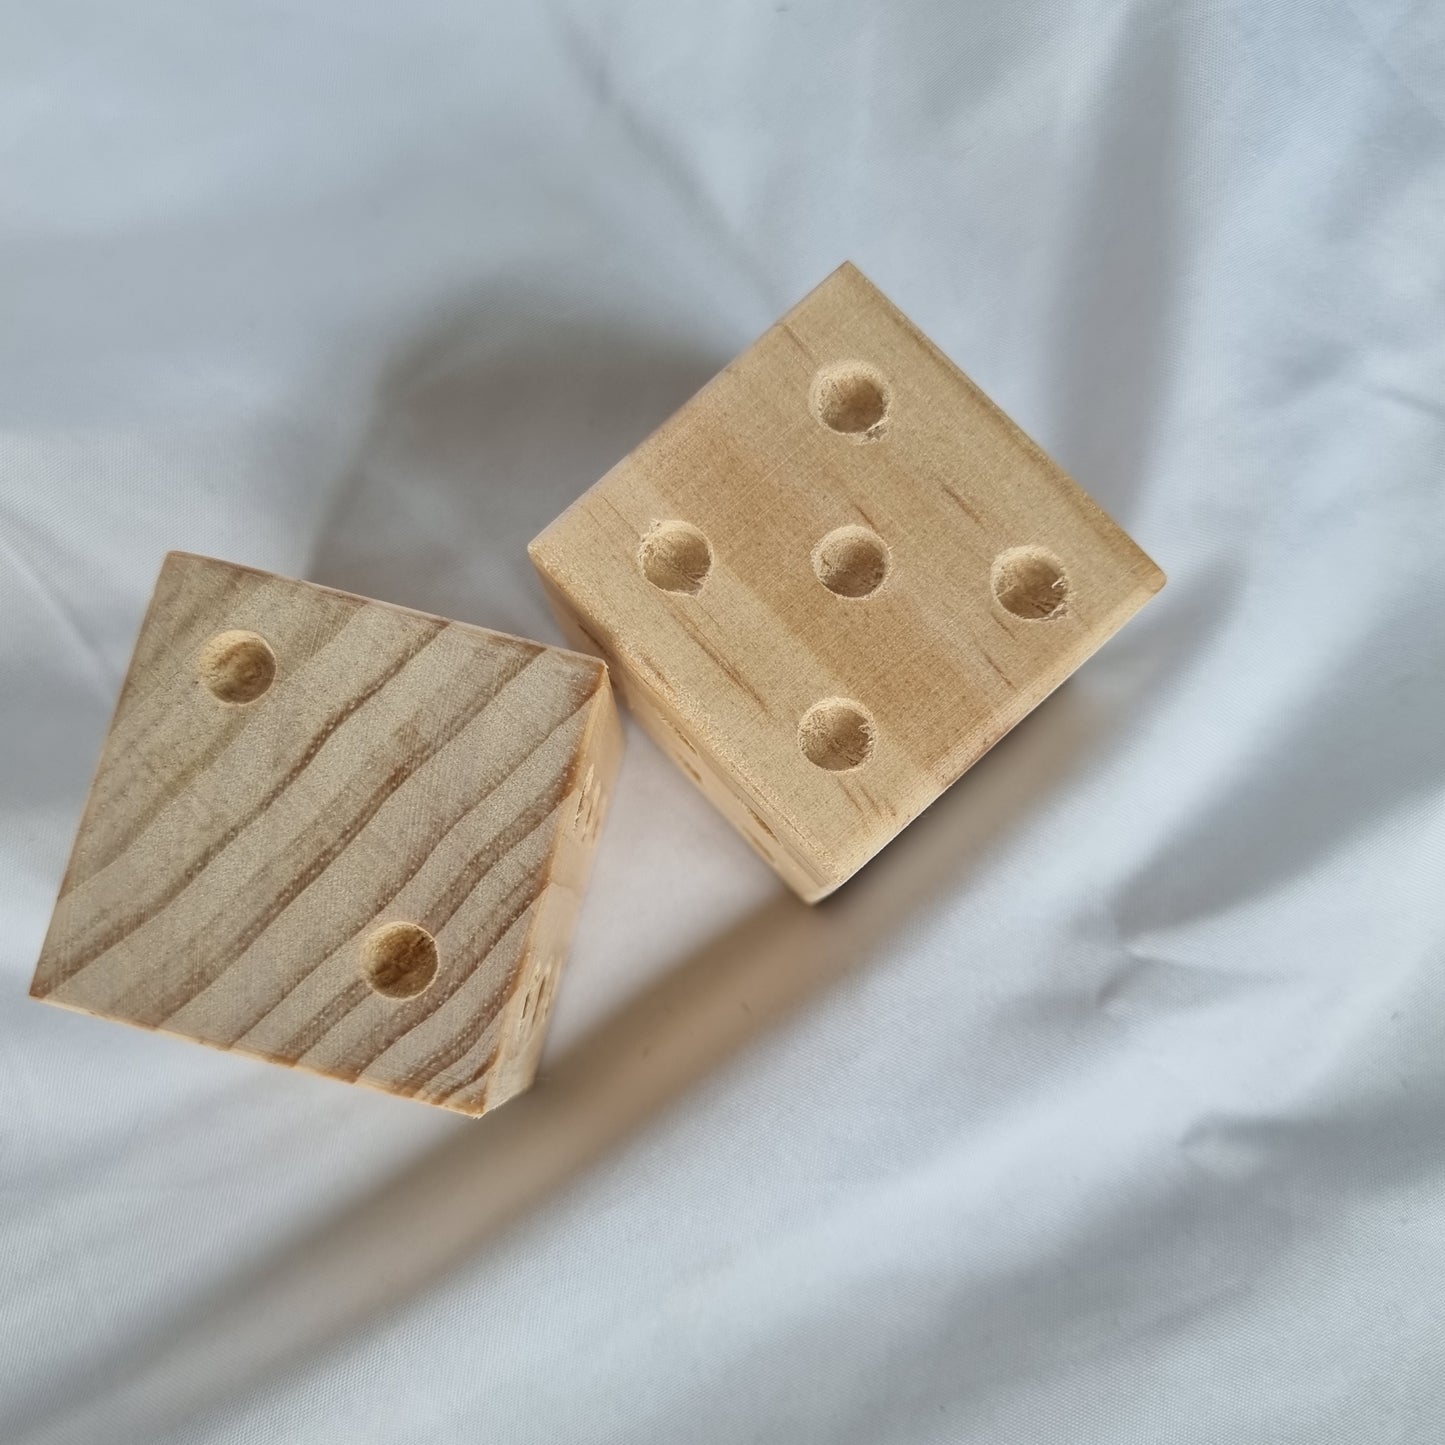 The Wooden Dice